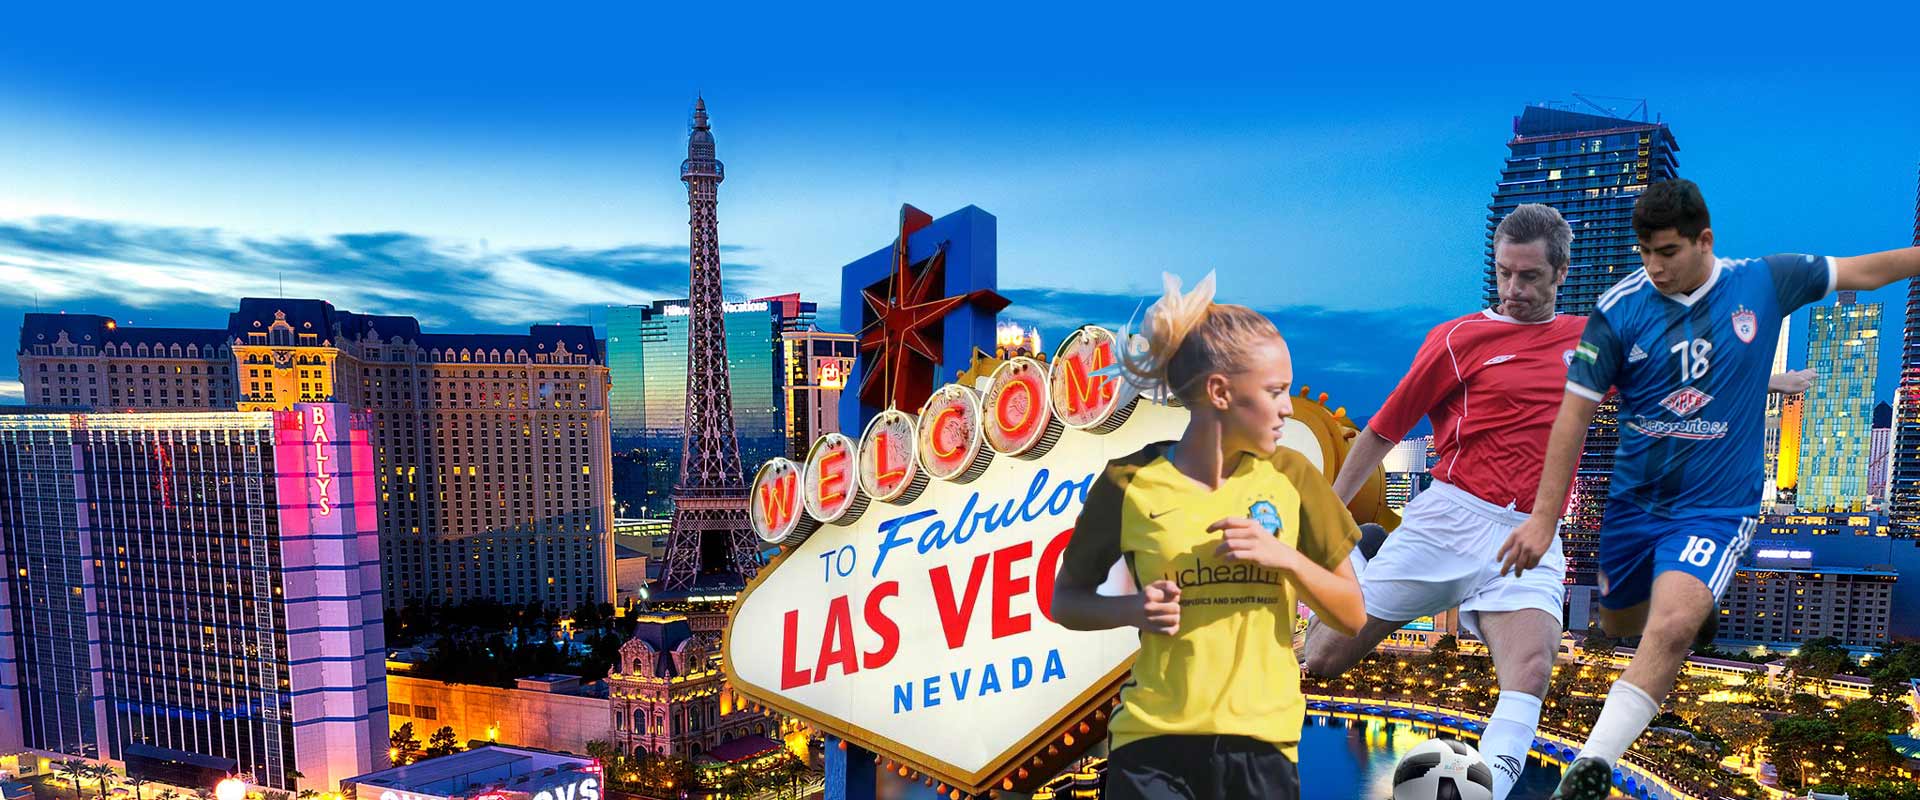 bacup-vegas-background